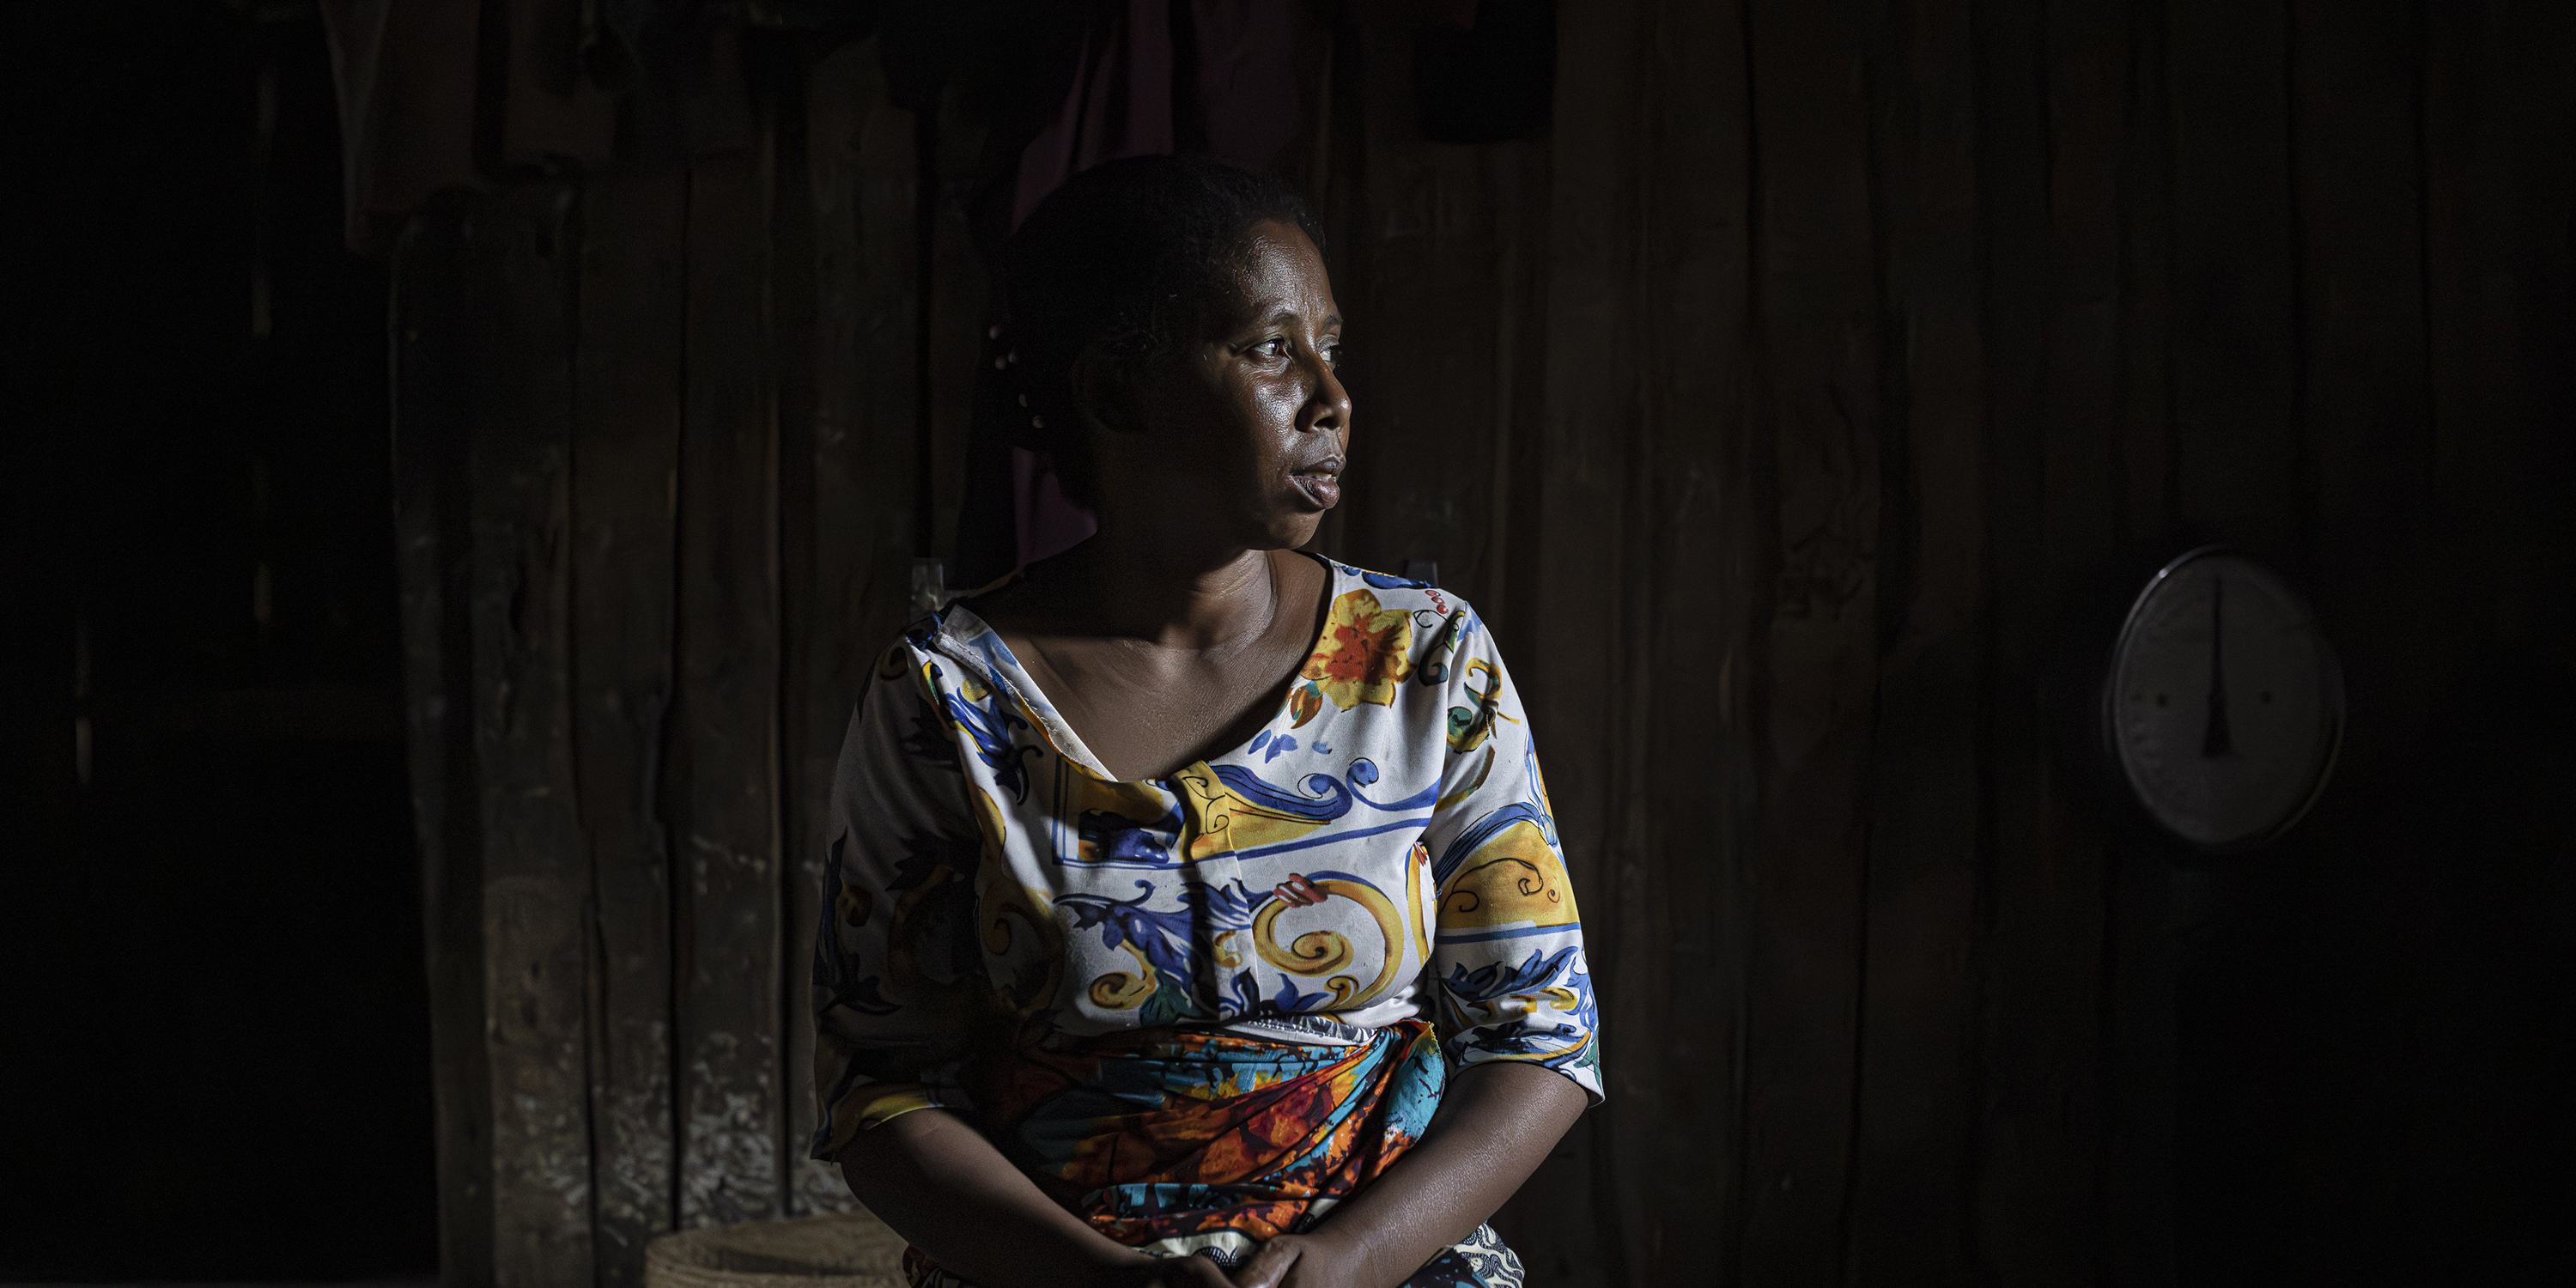 Razafihanta Flogone, 38, poses for a portrait inside her home in Ambinanibe in Fort-Dauphin, Madagascar, on July 11, 2023. Her husband Randriamanjaka Zeze used to fish where the port built by QMM is now located. They had to find new places to fish and she took on weaving to help support her family.